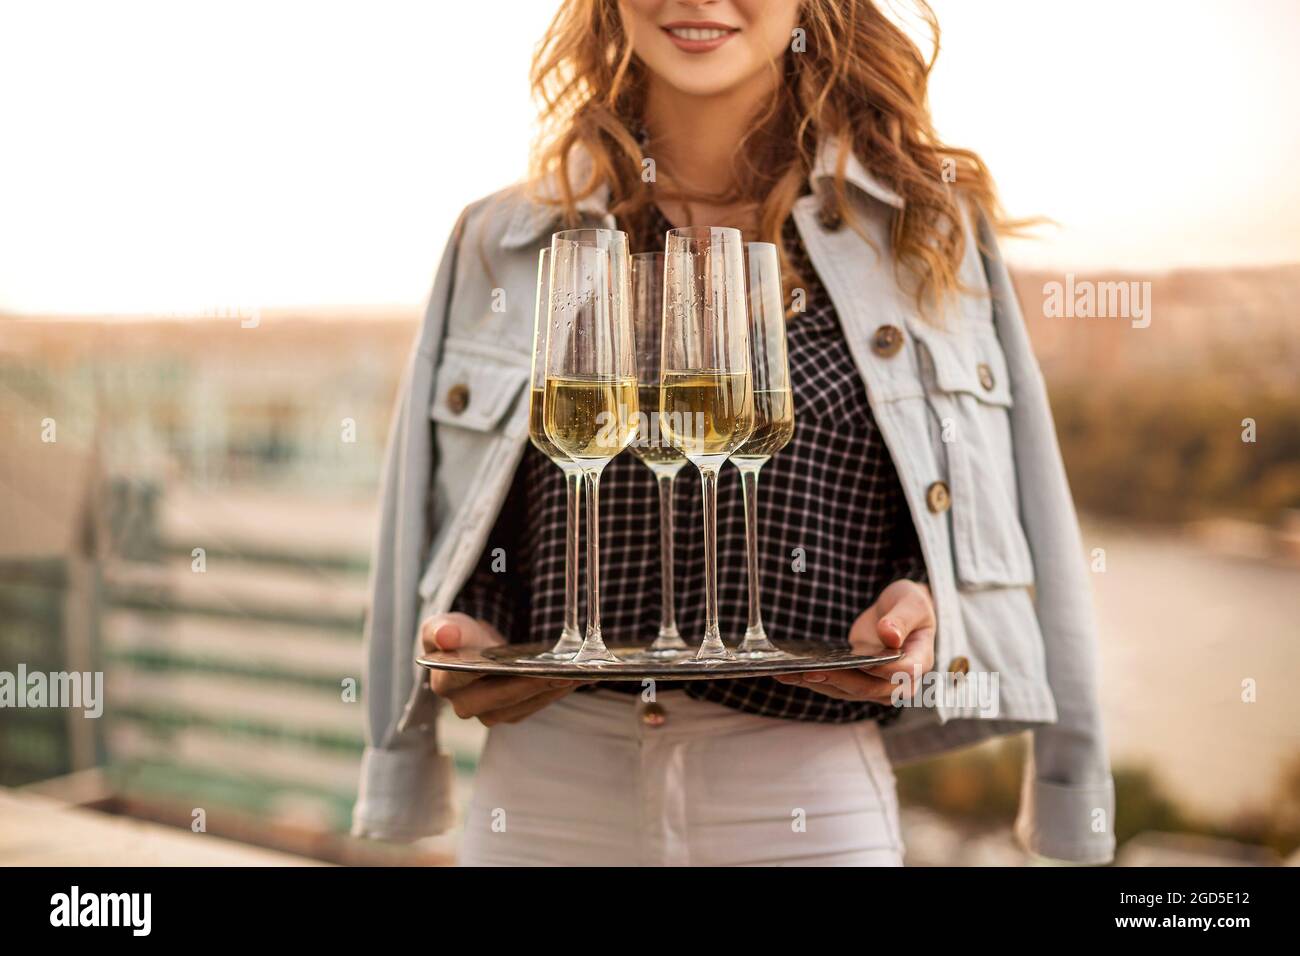 Young blonde smiling woman holding tray with champagne sparkling wine in flute glasses, standing outdoors over blurred countryside background, celebra Stock Photo